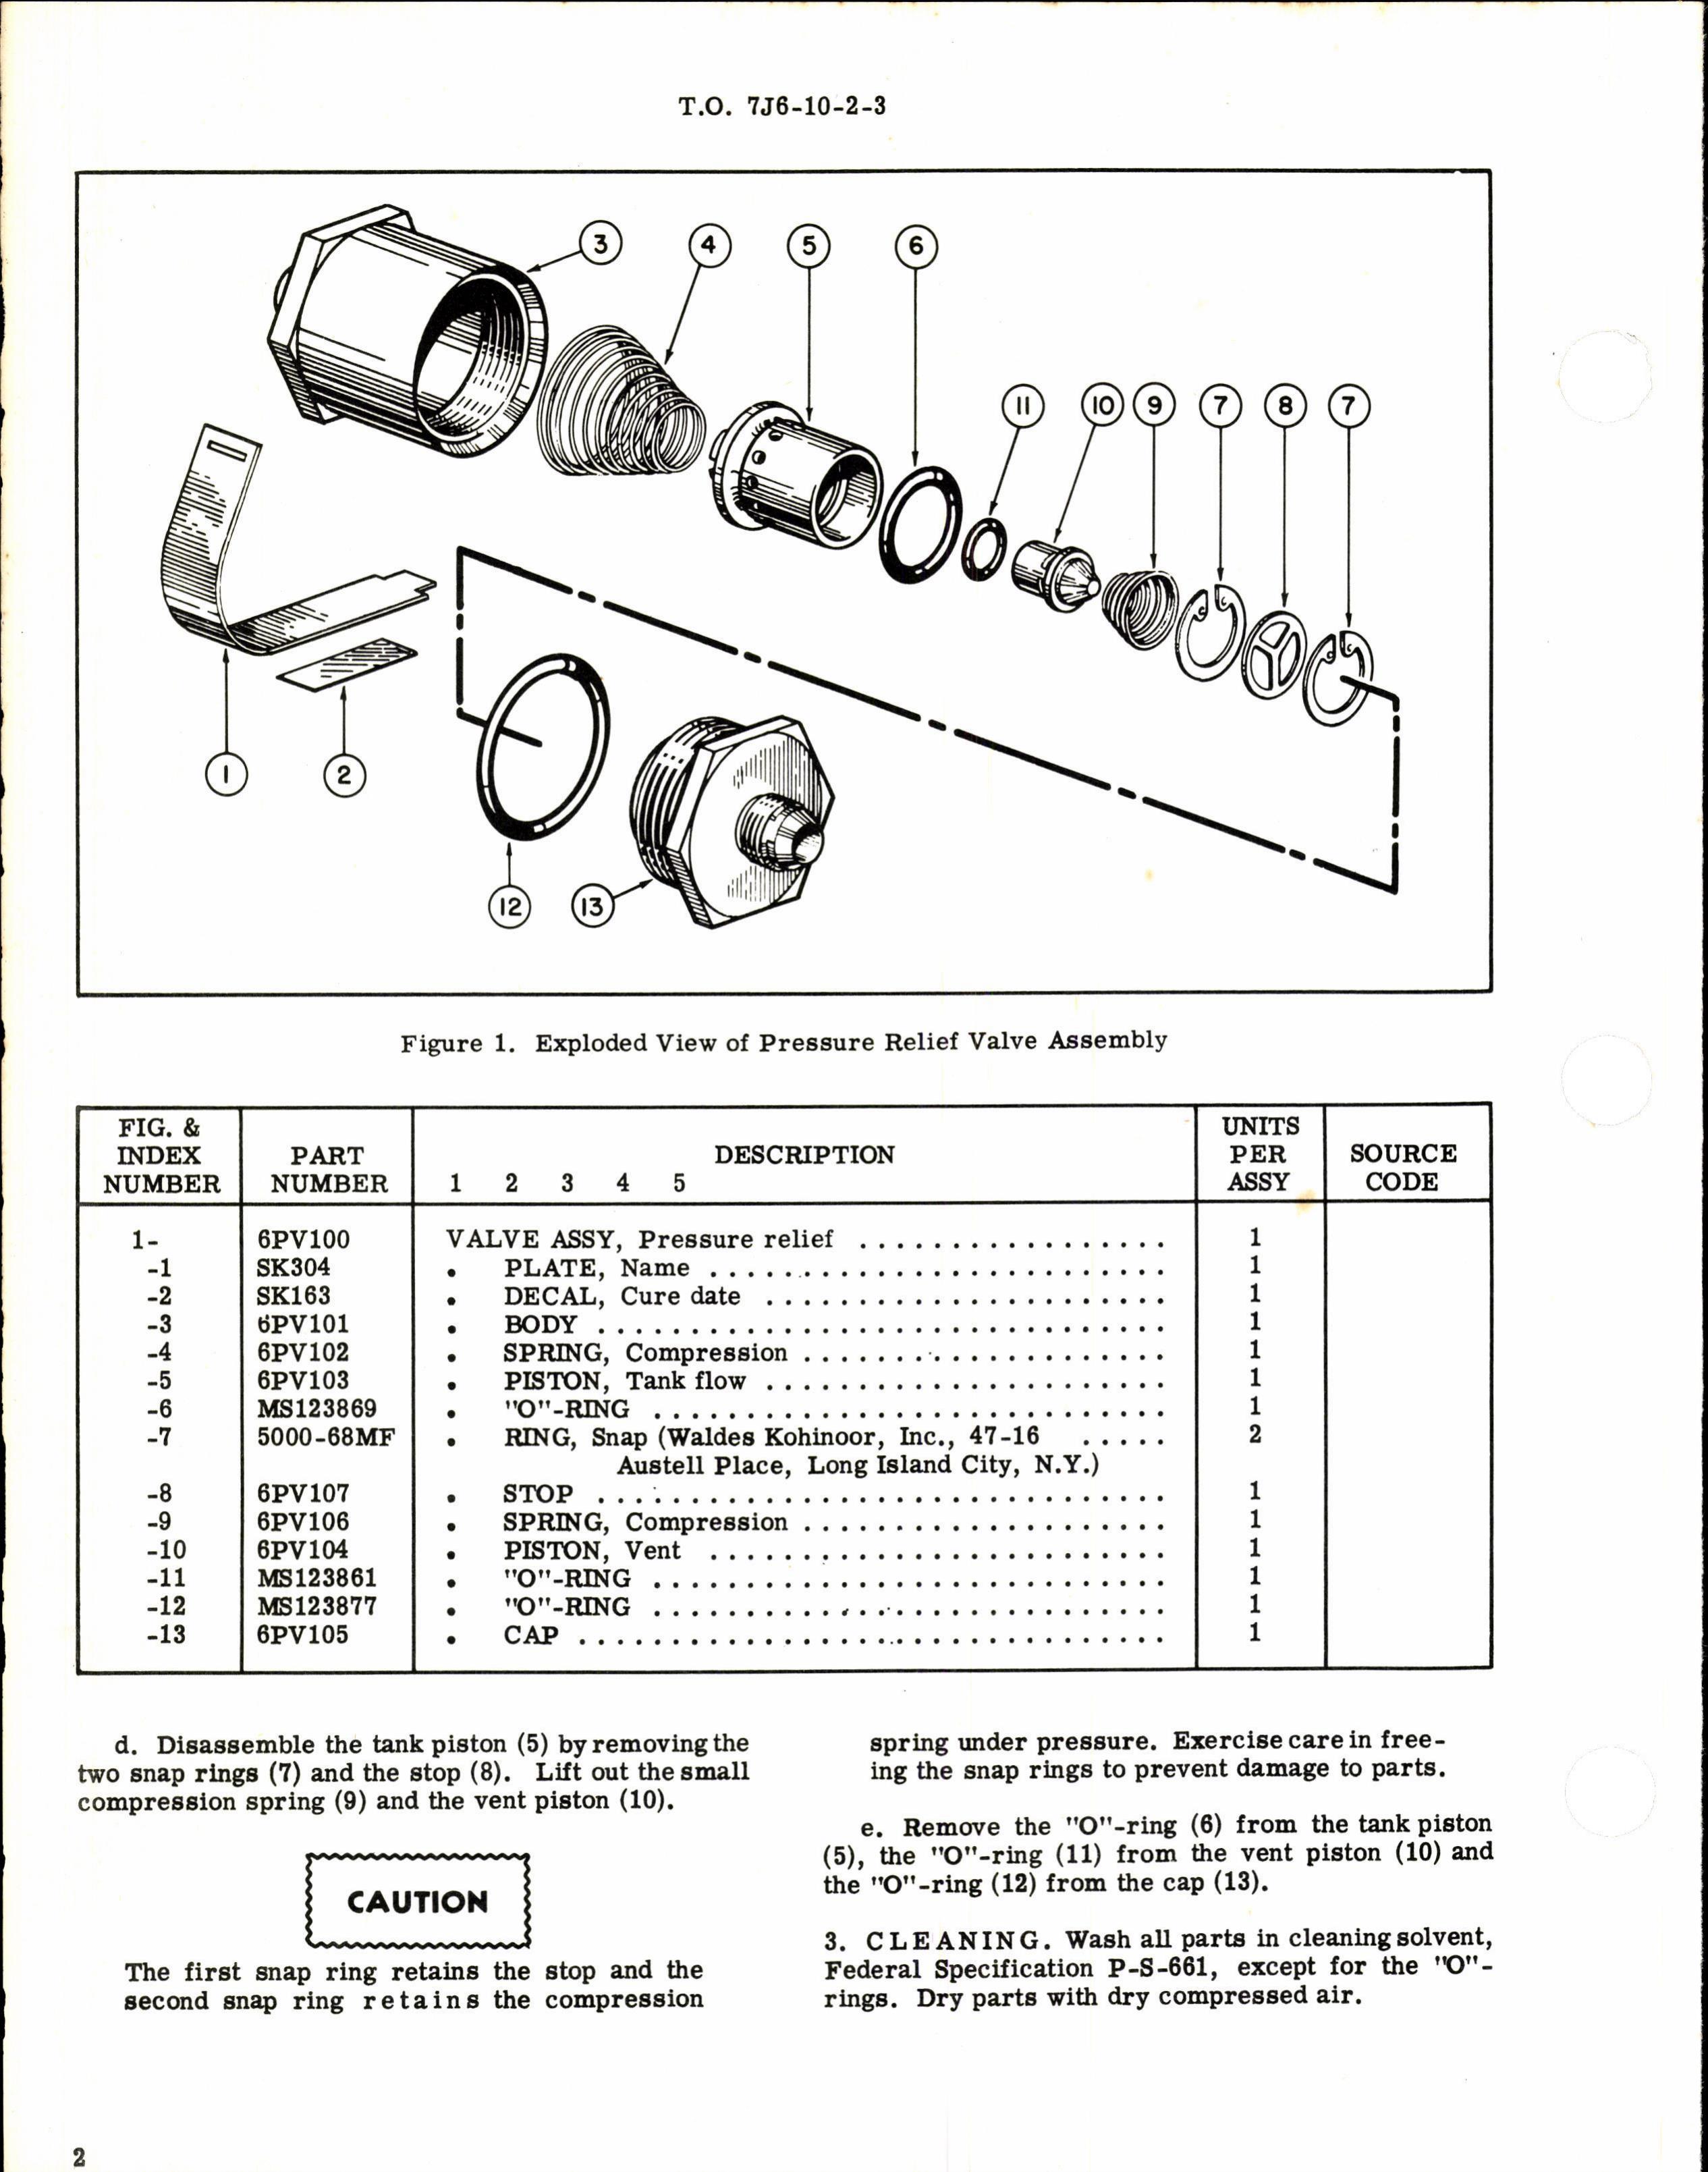 Sample page 2 from AirCorps Library document: Overhaul Instructions with Parts Breakdown for Pressure Relief Valve Assembly